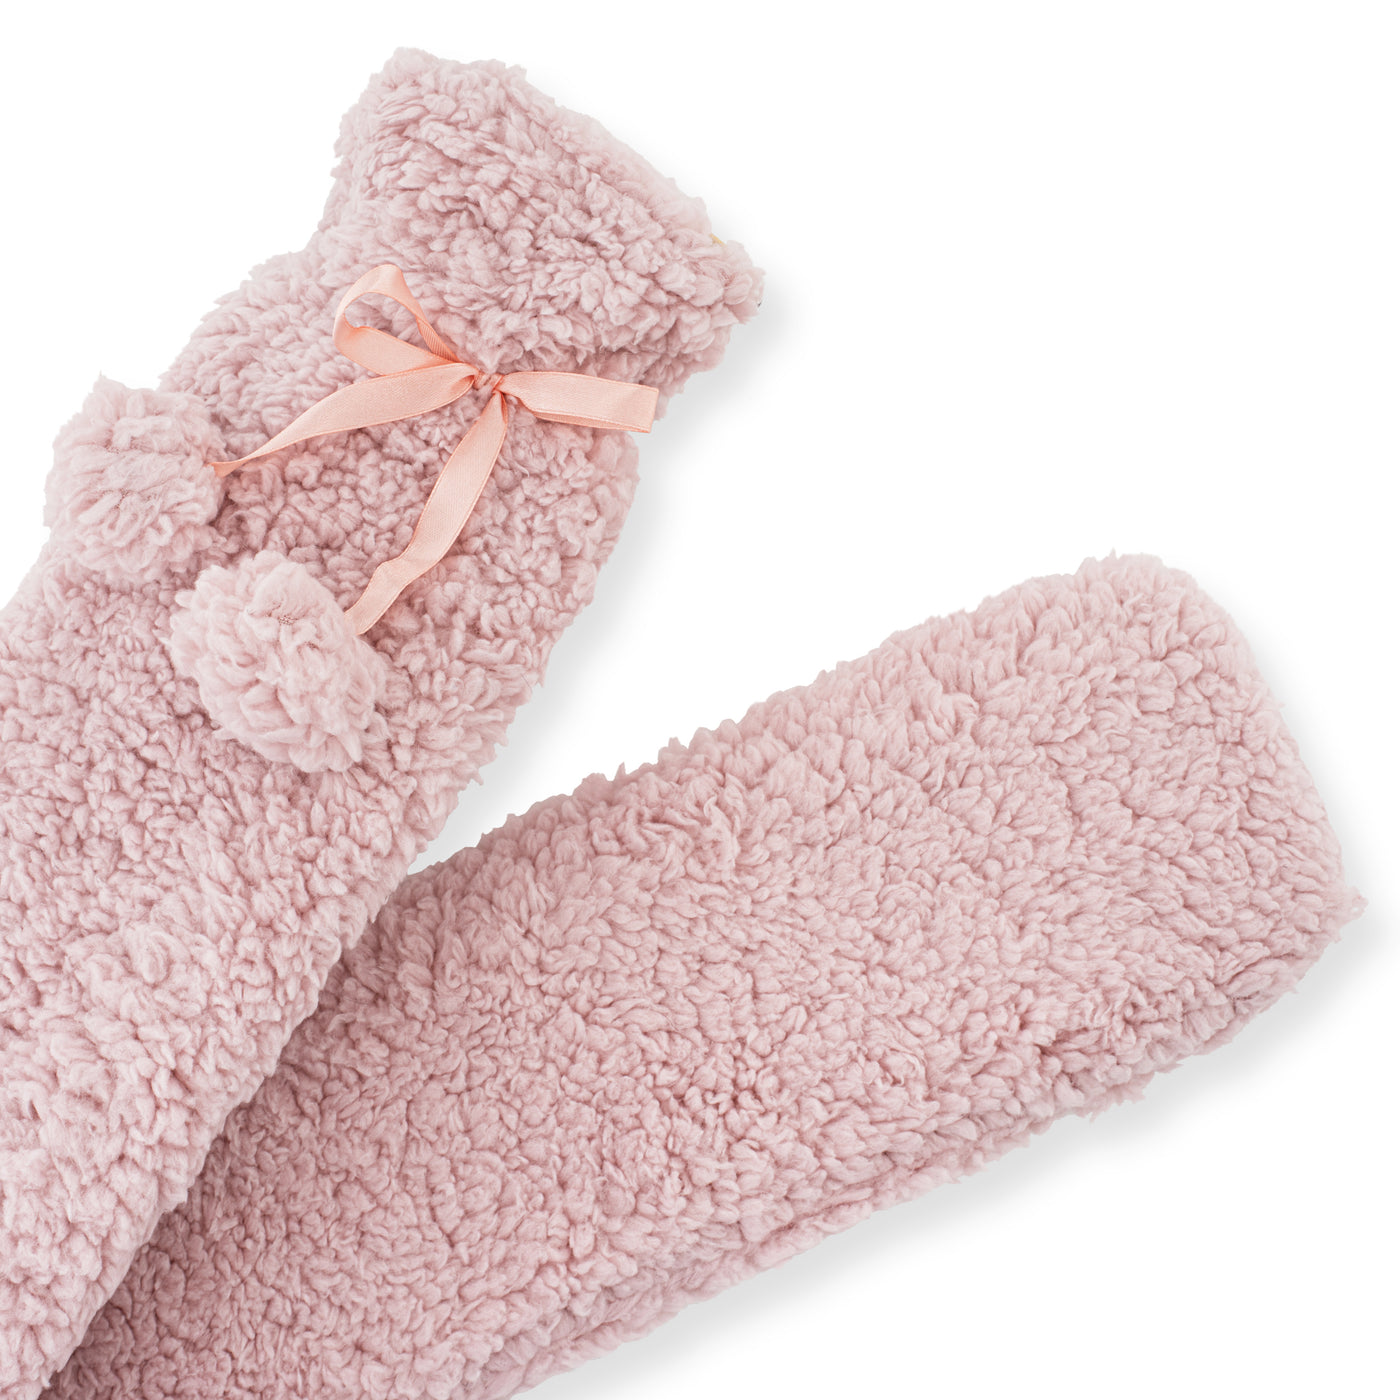 Long Hot Water Bottle with Sherpa Cover - Pink